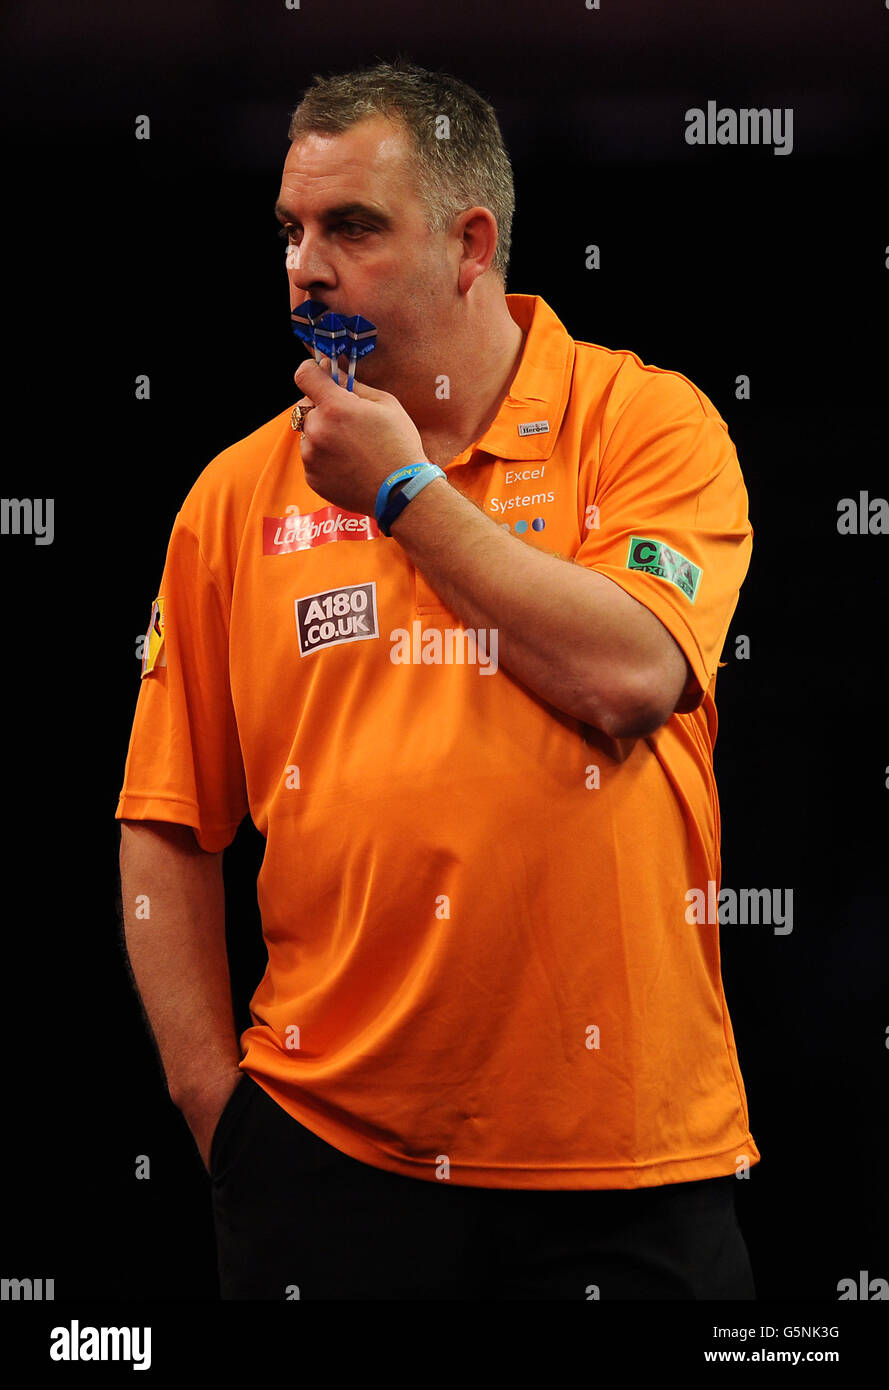 England's James Richardson looks ponderous during his First Round Match against England's Andy Hamilton during the Ladbrokes.com World Darts Championship at Alexandra Palace, London. Stock Photo